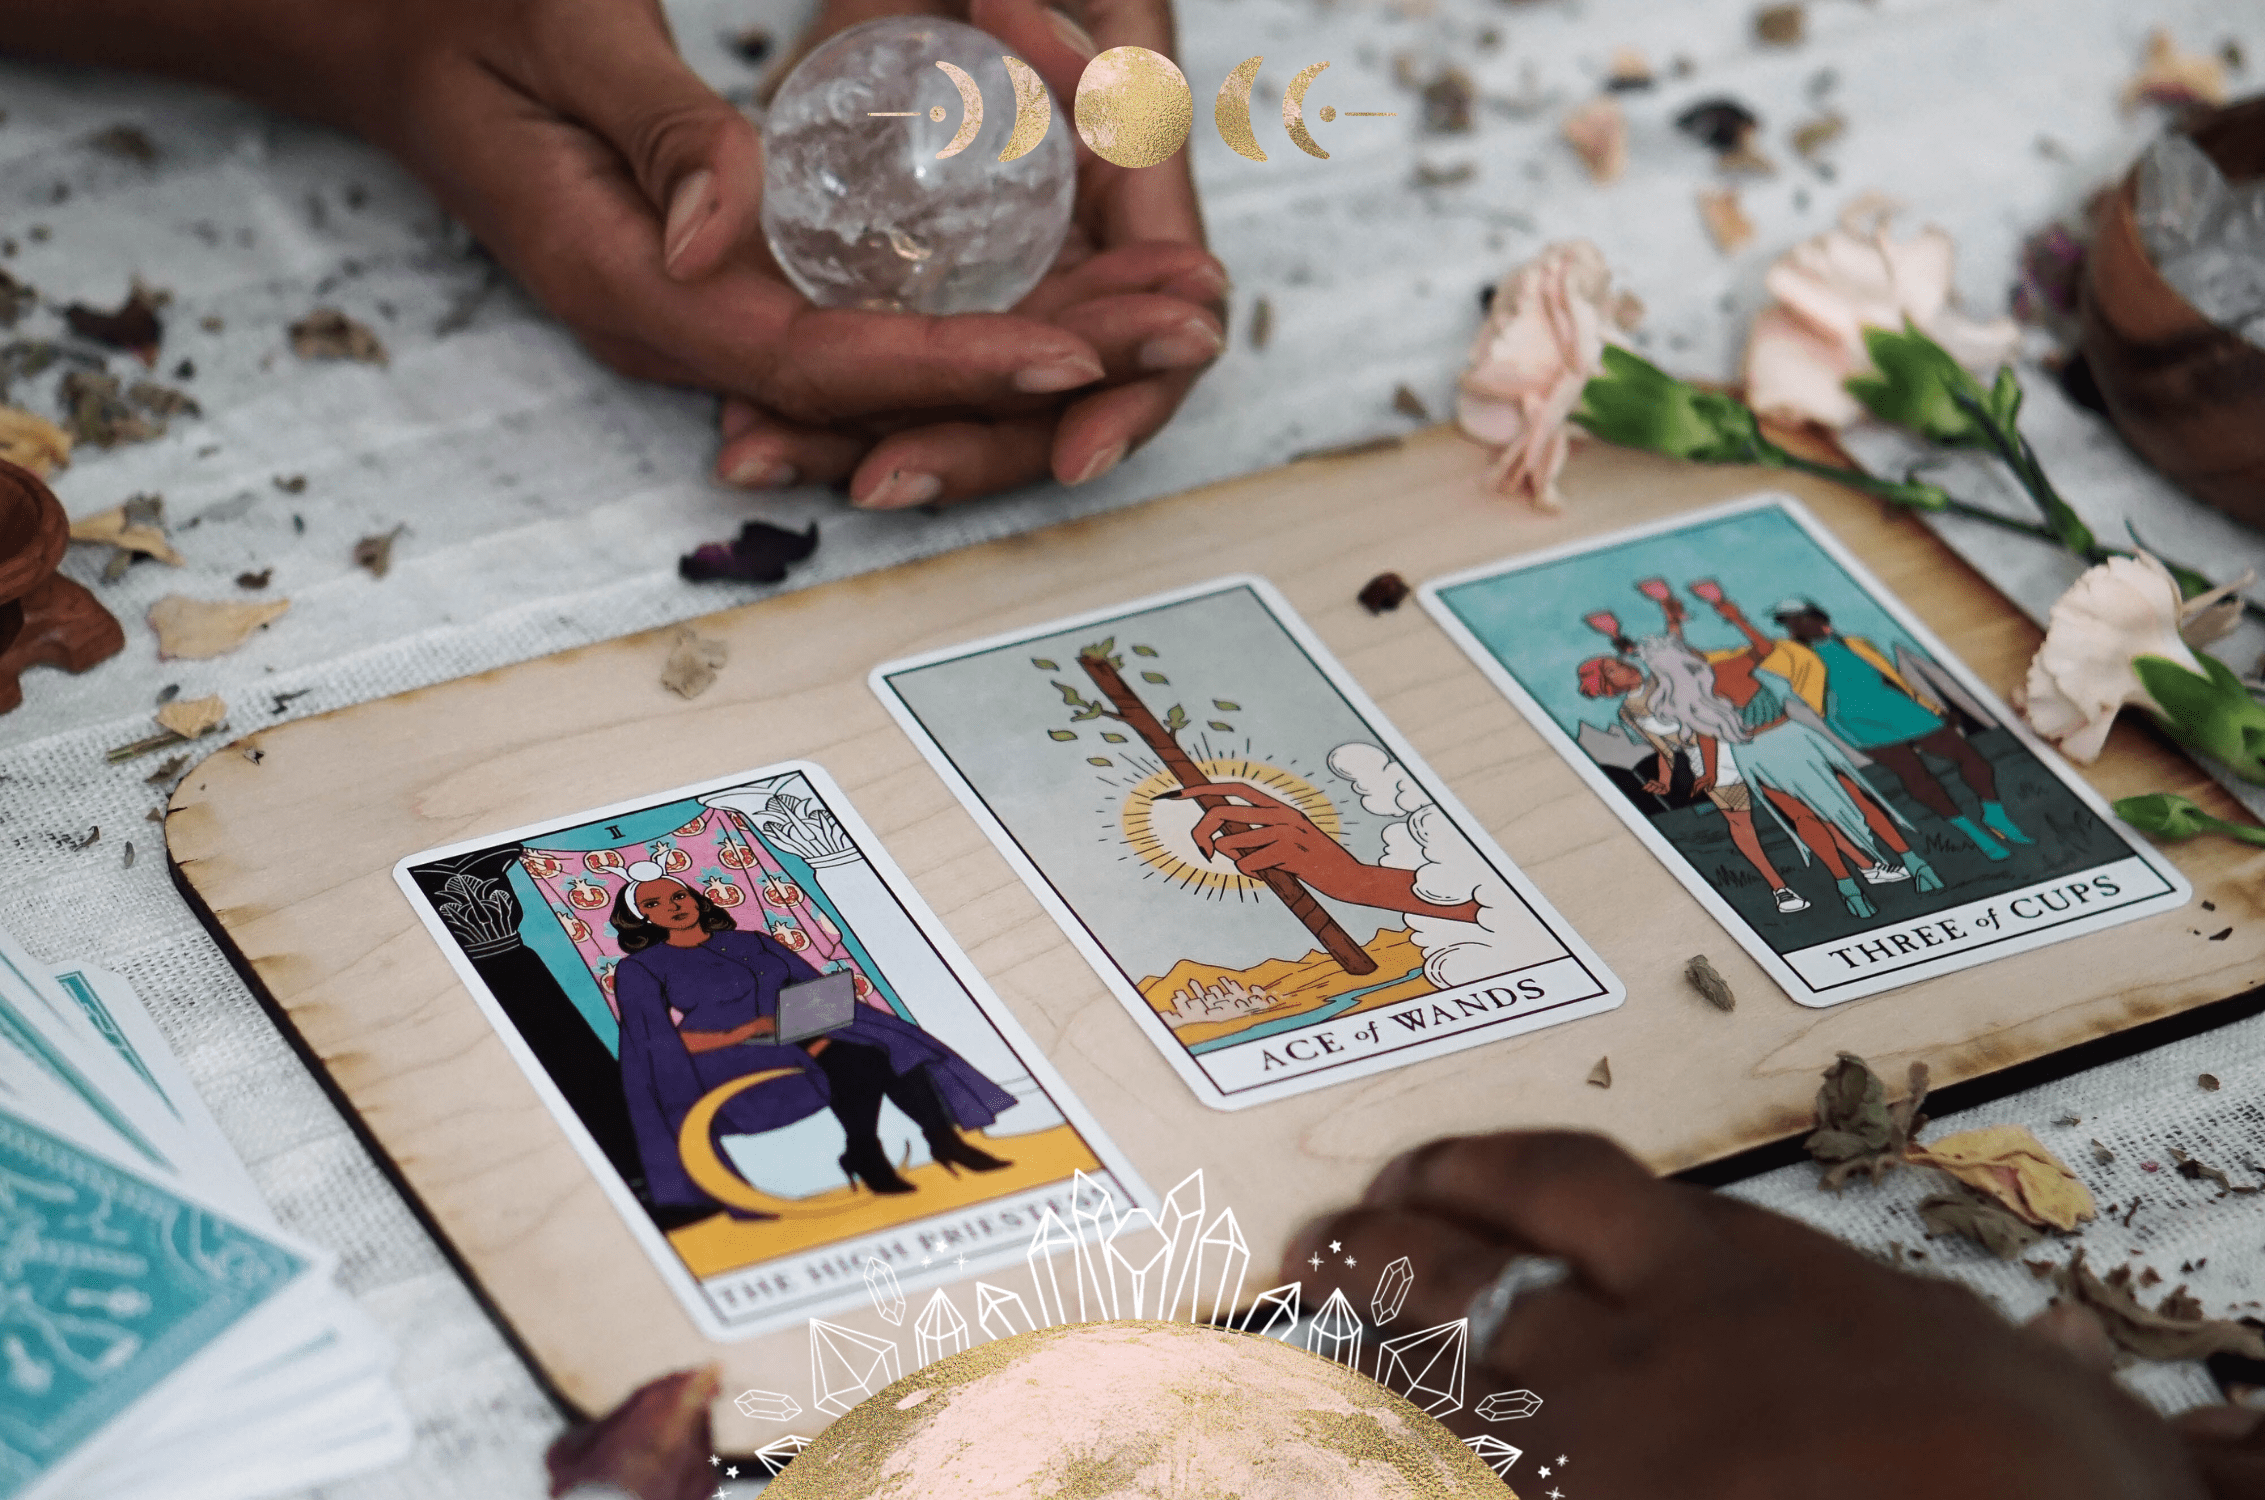 Best Crystals for Tarot & Oracle Card Readings